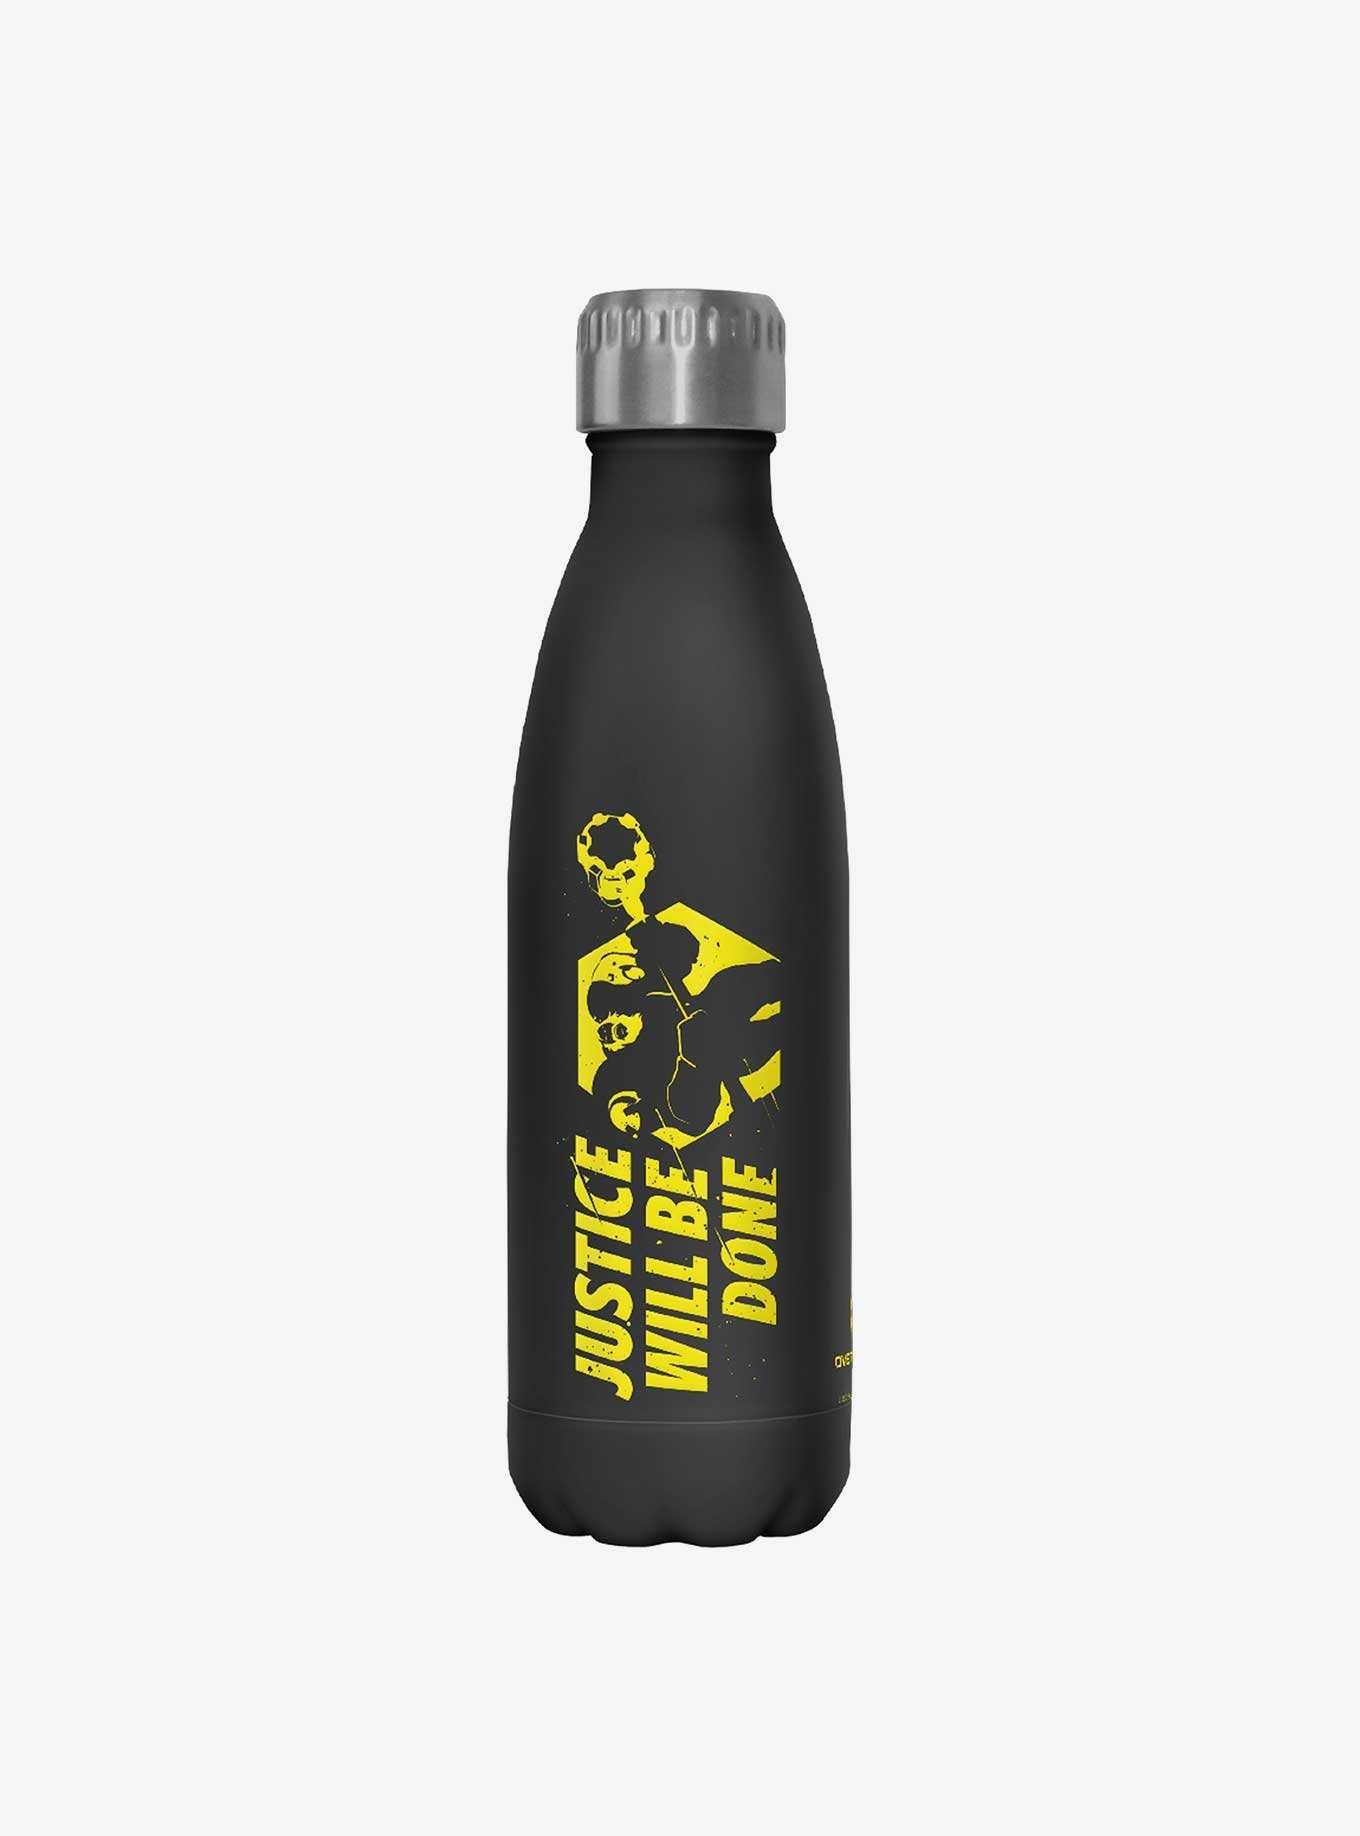 Overwatch Reinhardt Justice Will Be Done Stainless Steel Water Bottle, , hi-res